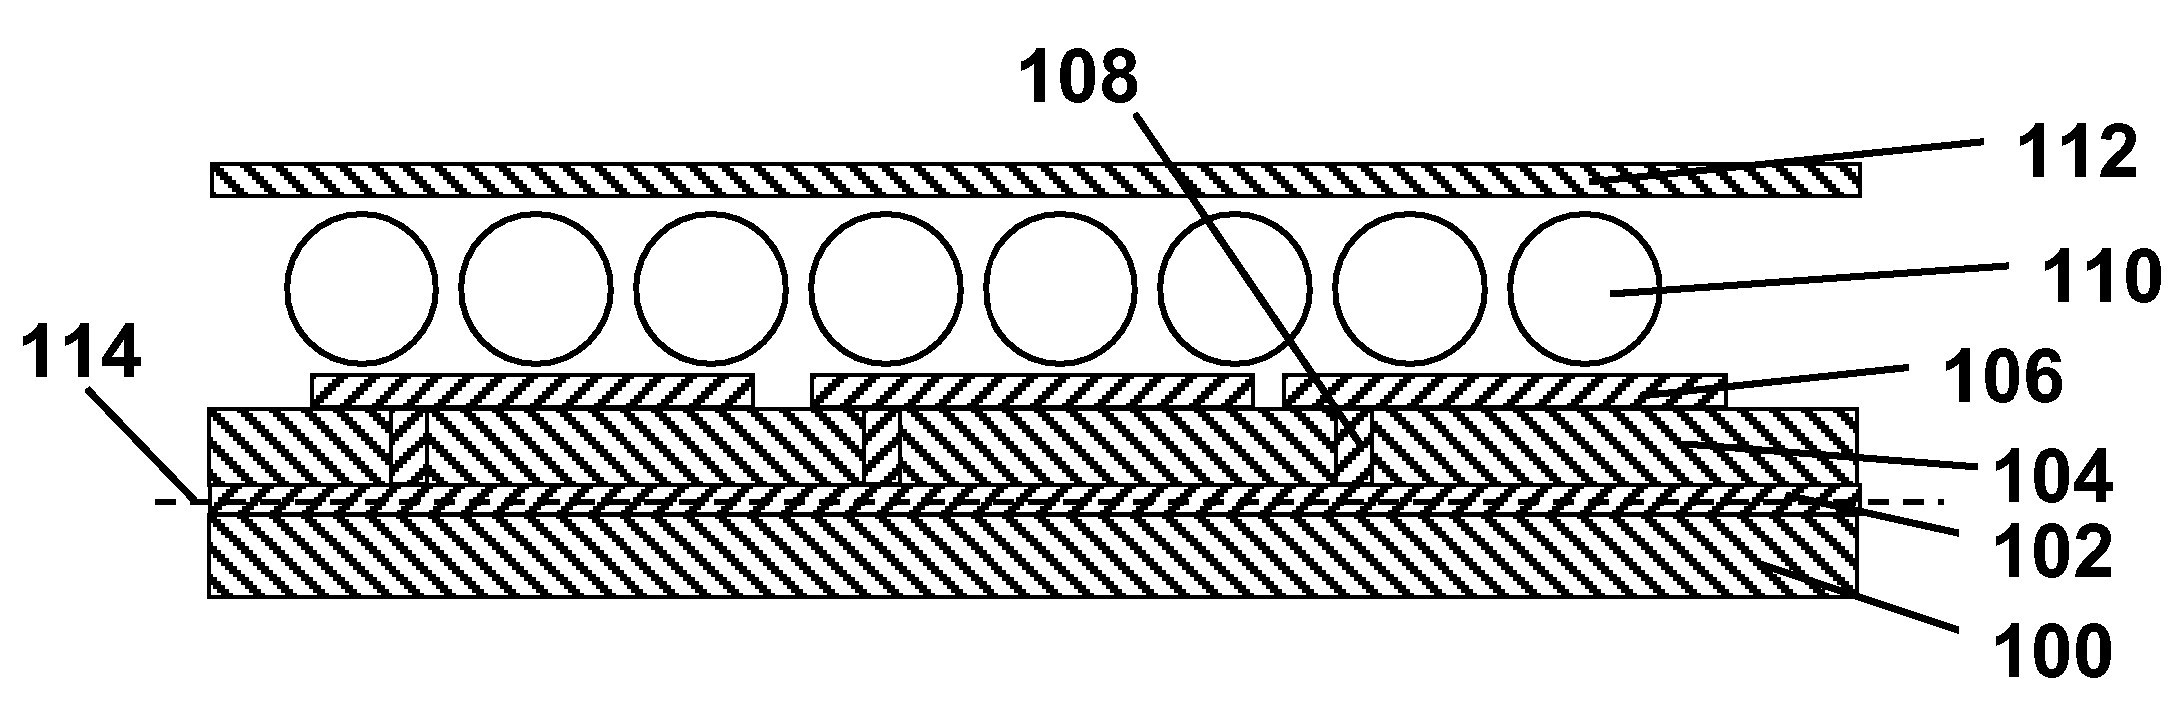 Electro-optic displays, and components for use therein